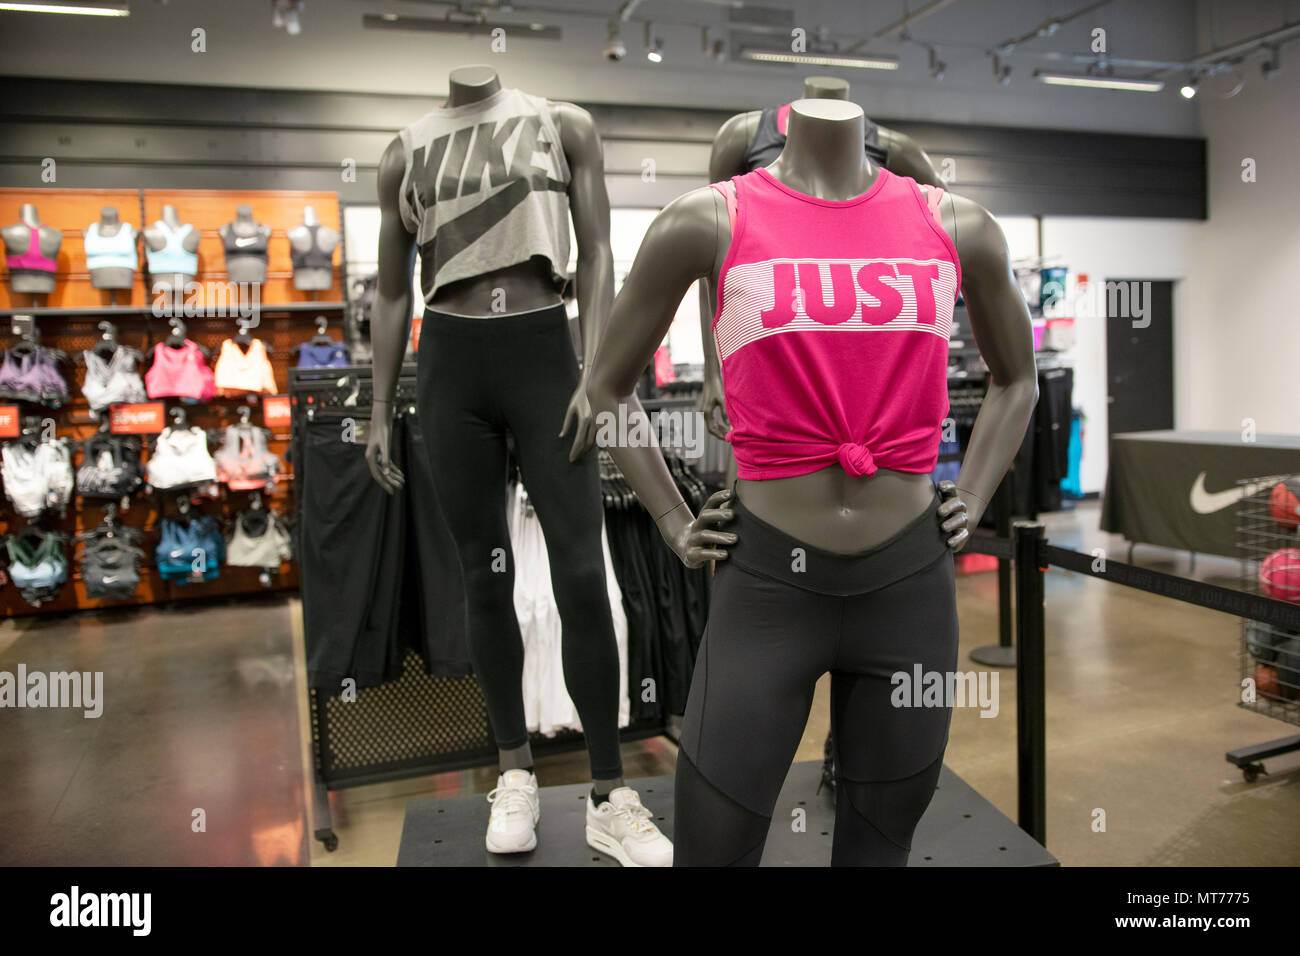 Mannequins in the women's department of Niketown at the Tanger outlet mall in Deer Park Long Island, New York. Stock Photo